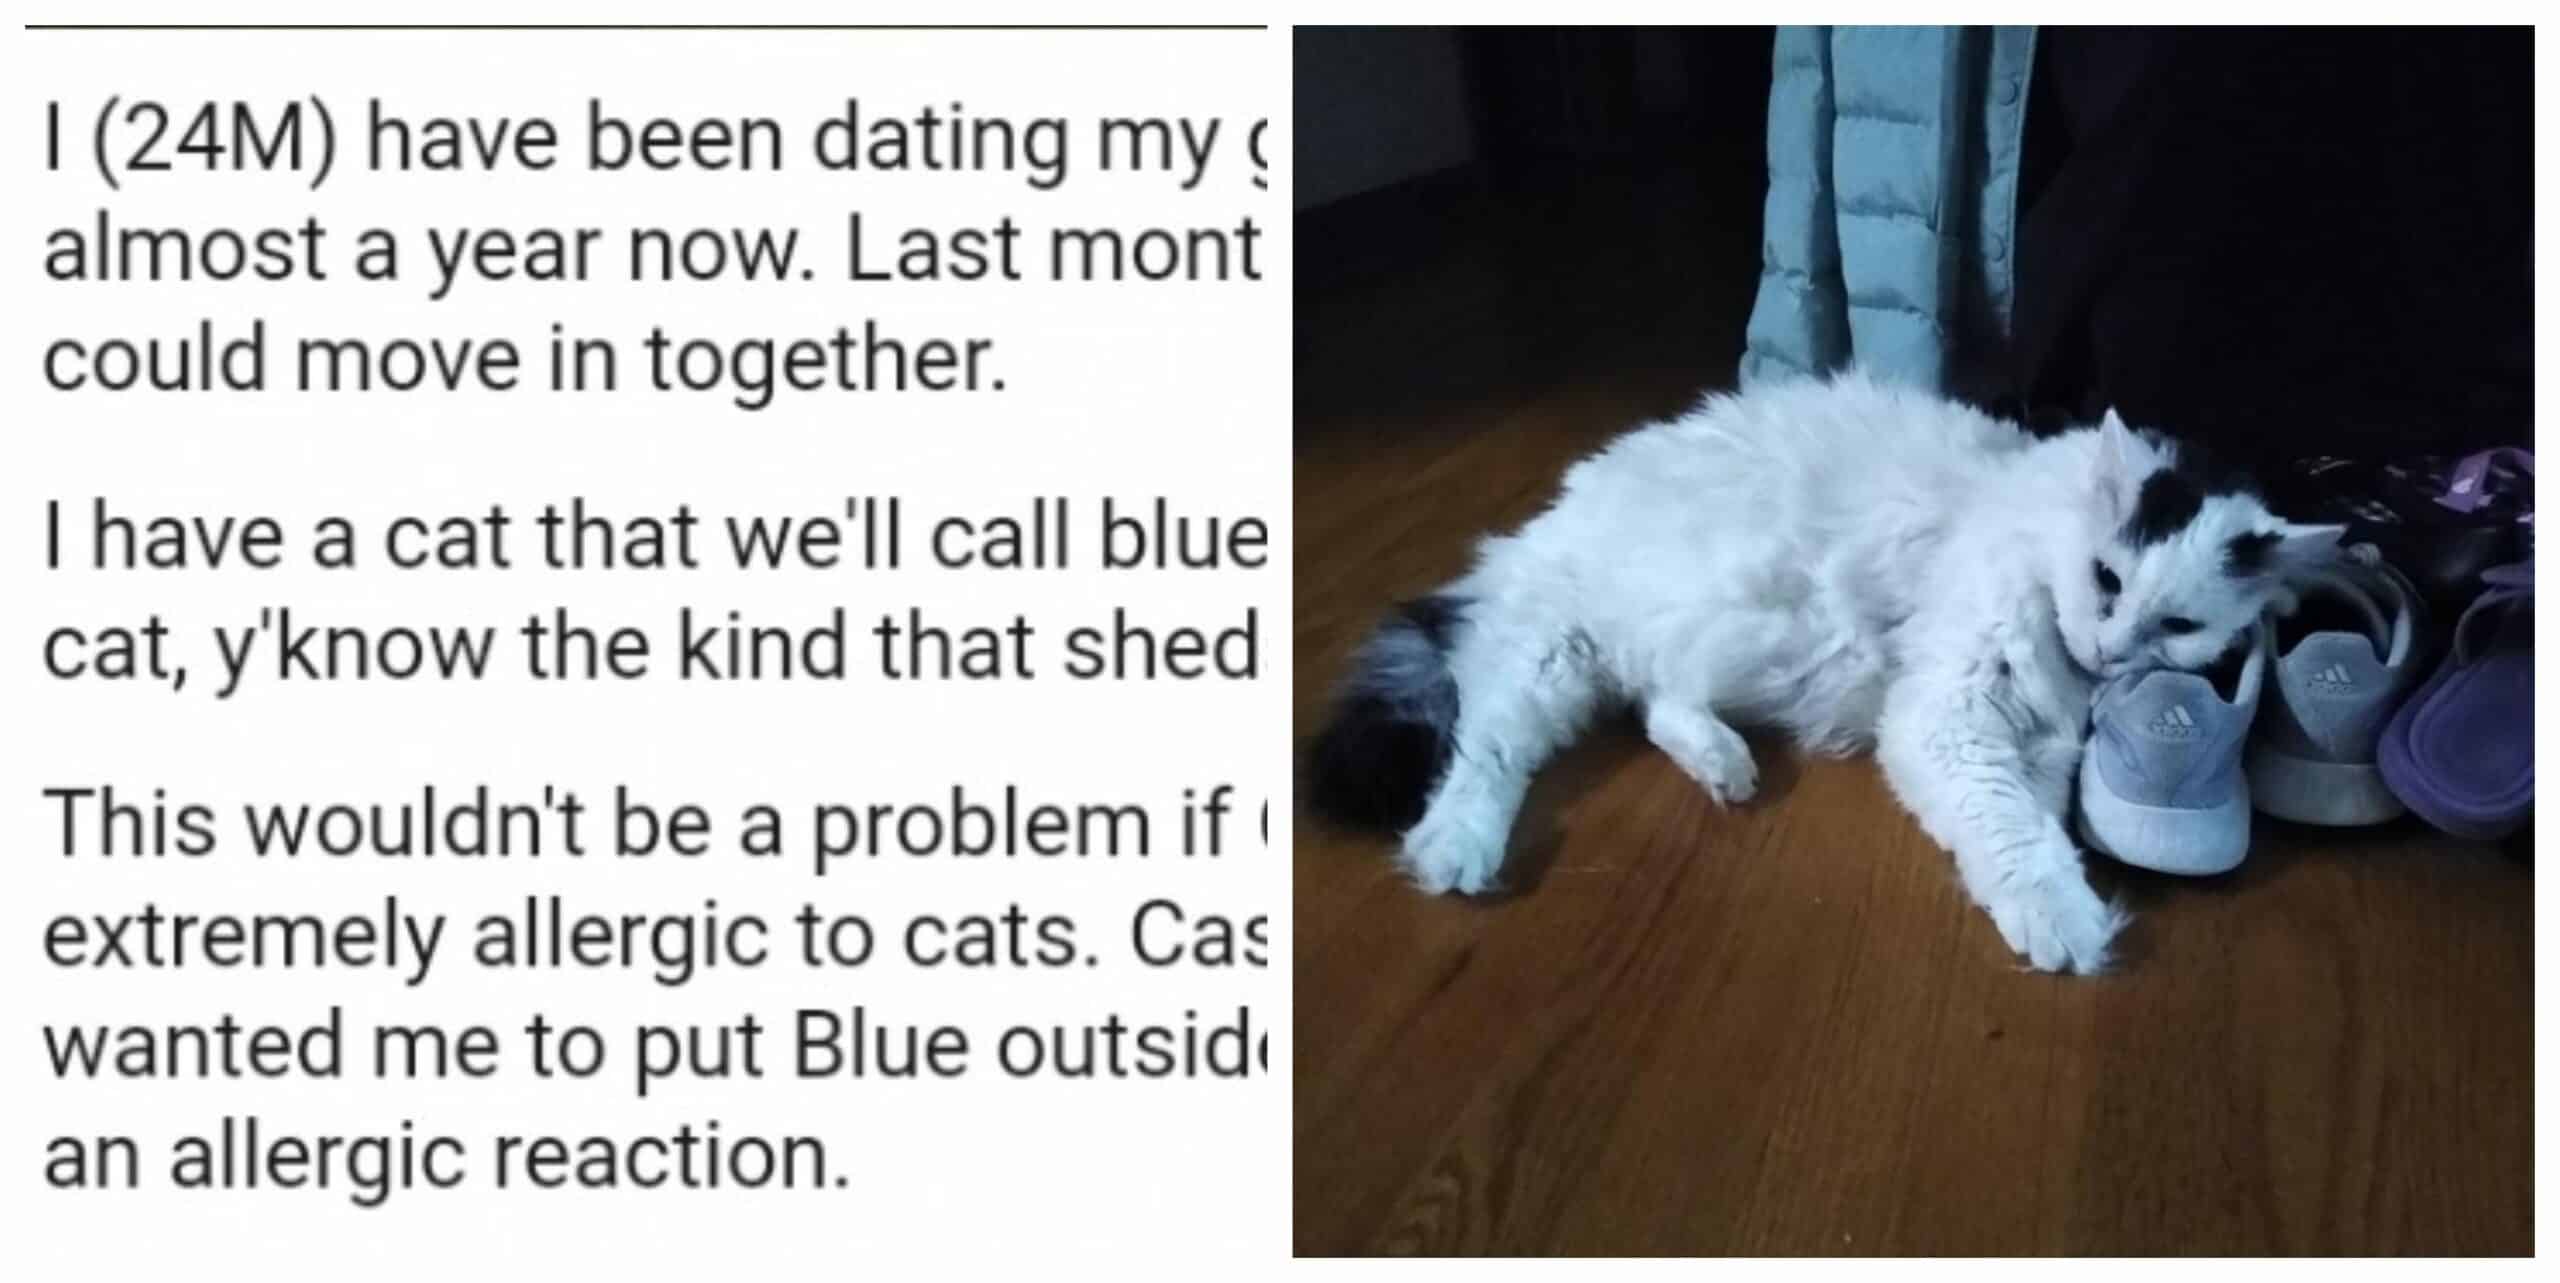 Because his allergic girlfriend wants to move in with him, the man refuses to keep his indoor cat outside